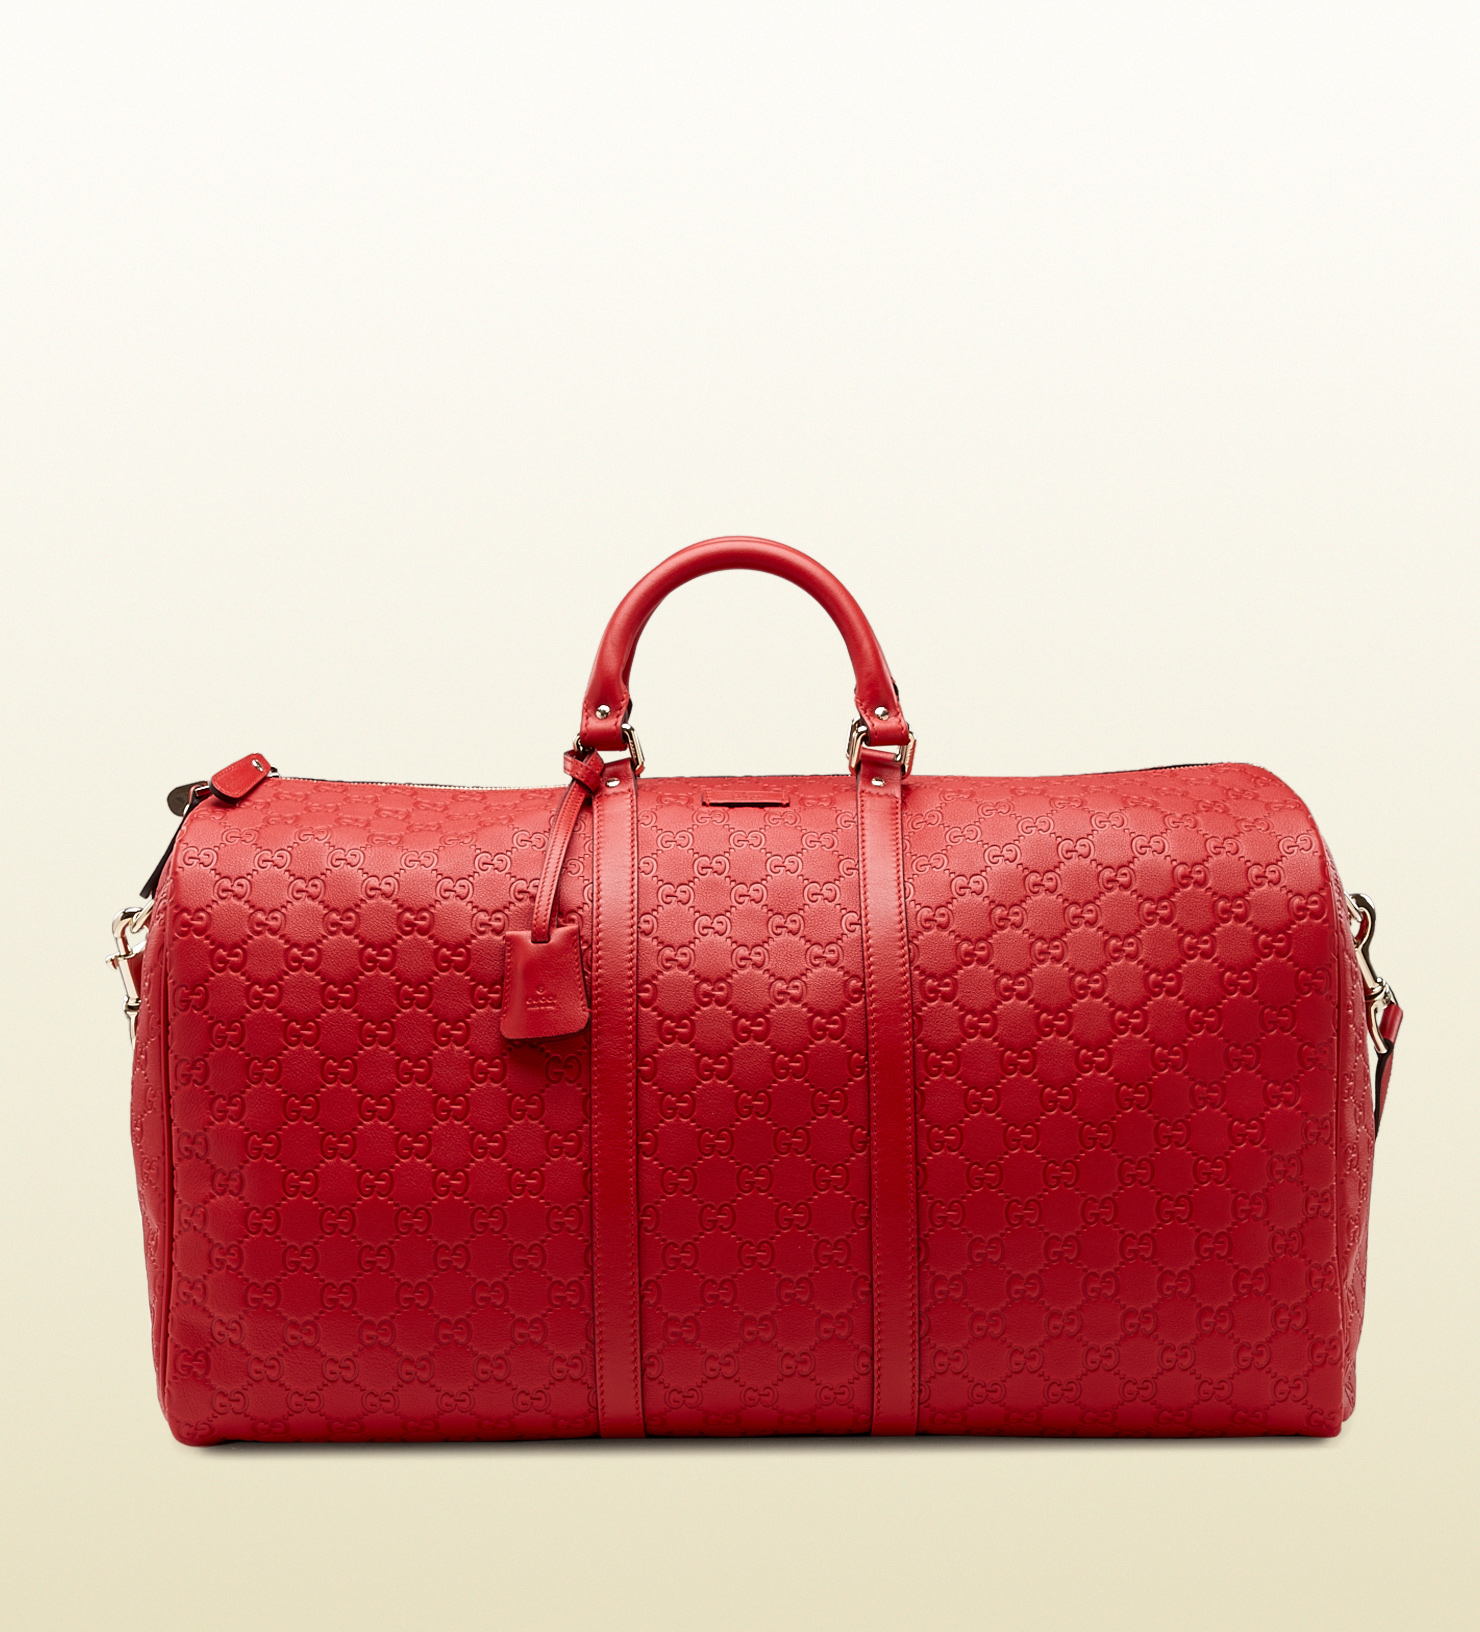 Lyst - Gucci Red Ssima Leather Carry-on Duffel Bag in Red